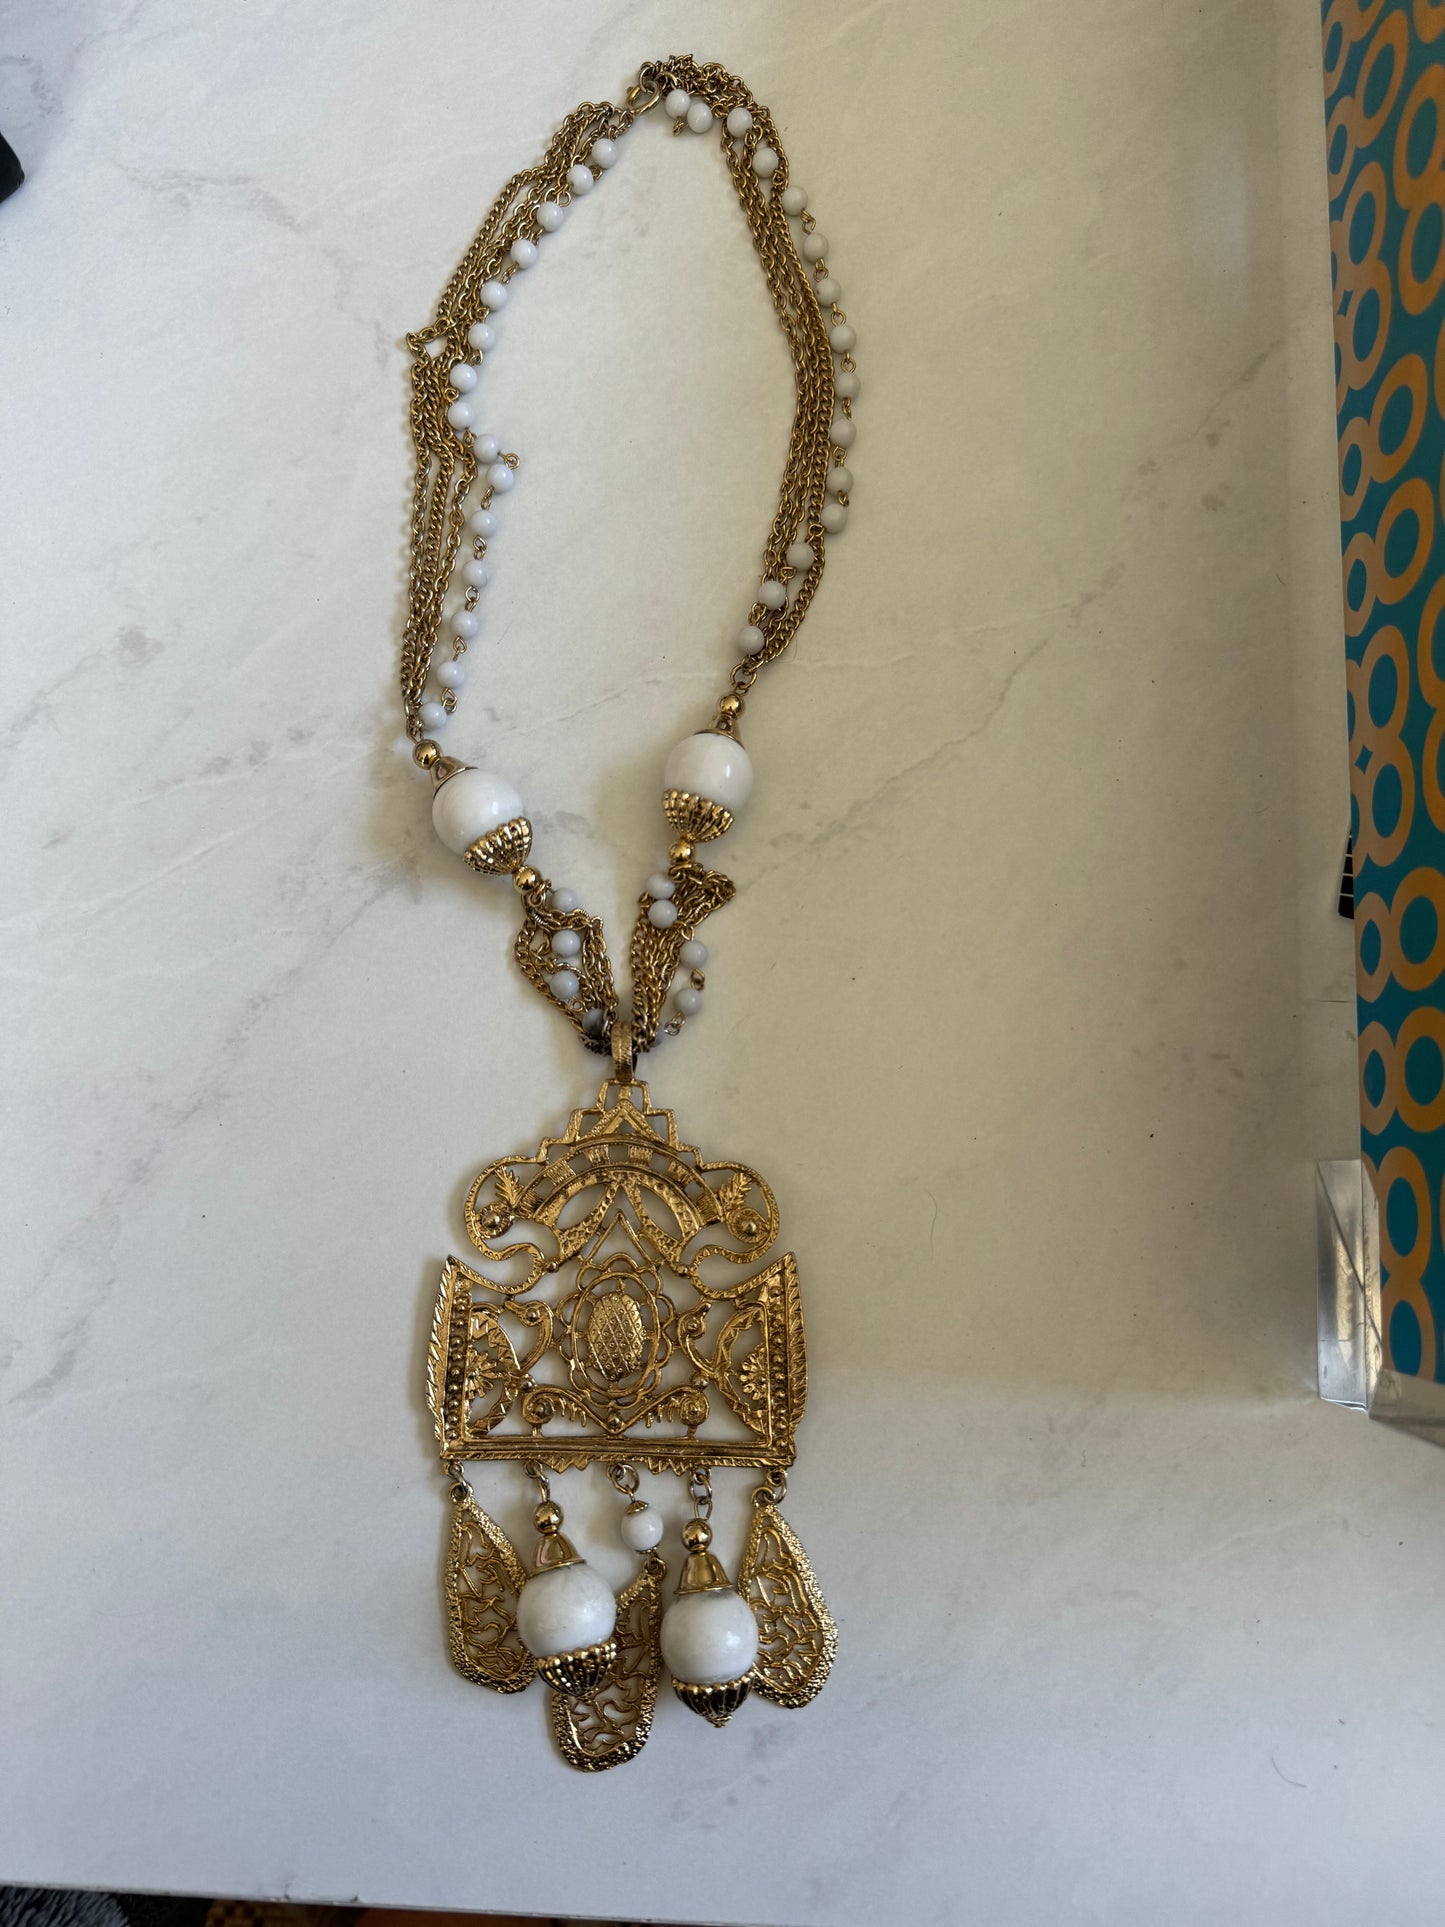 Vintage white and gold tone pendant necklace